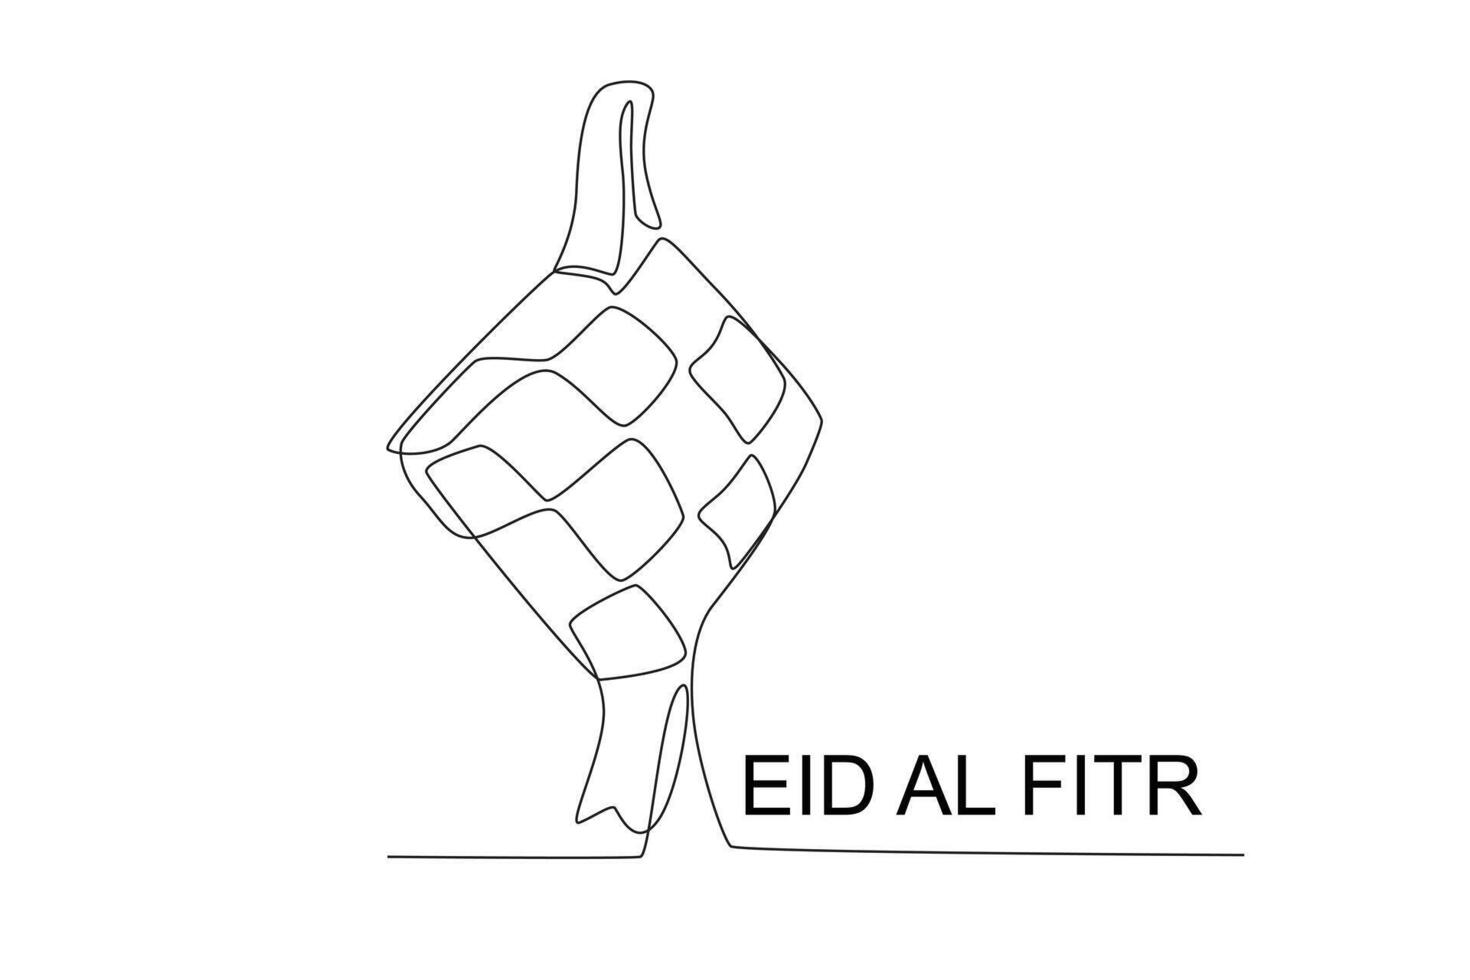 Eid al Fitr is symbolized by the ketupat vector